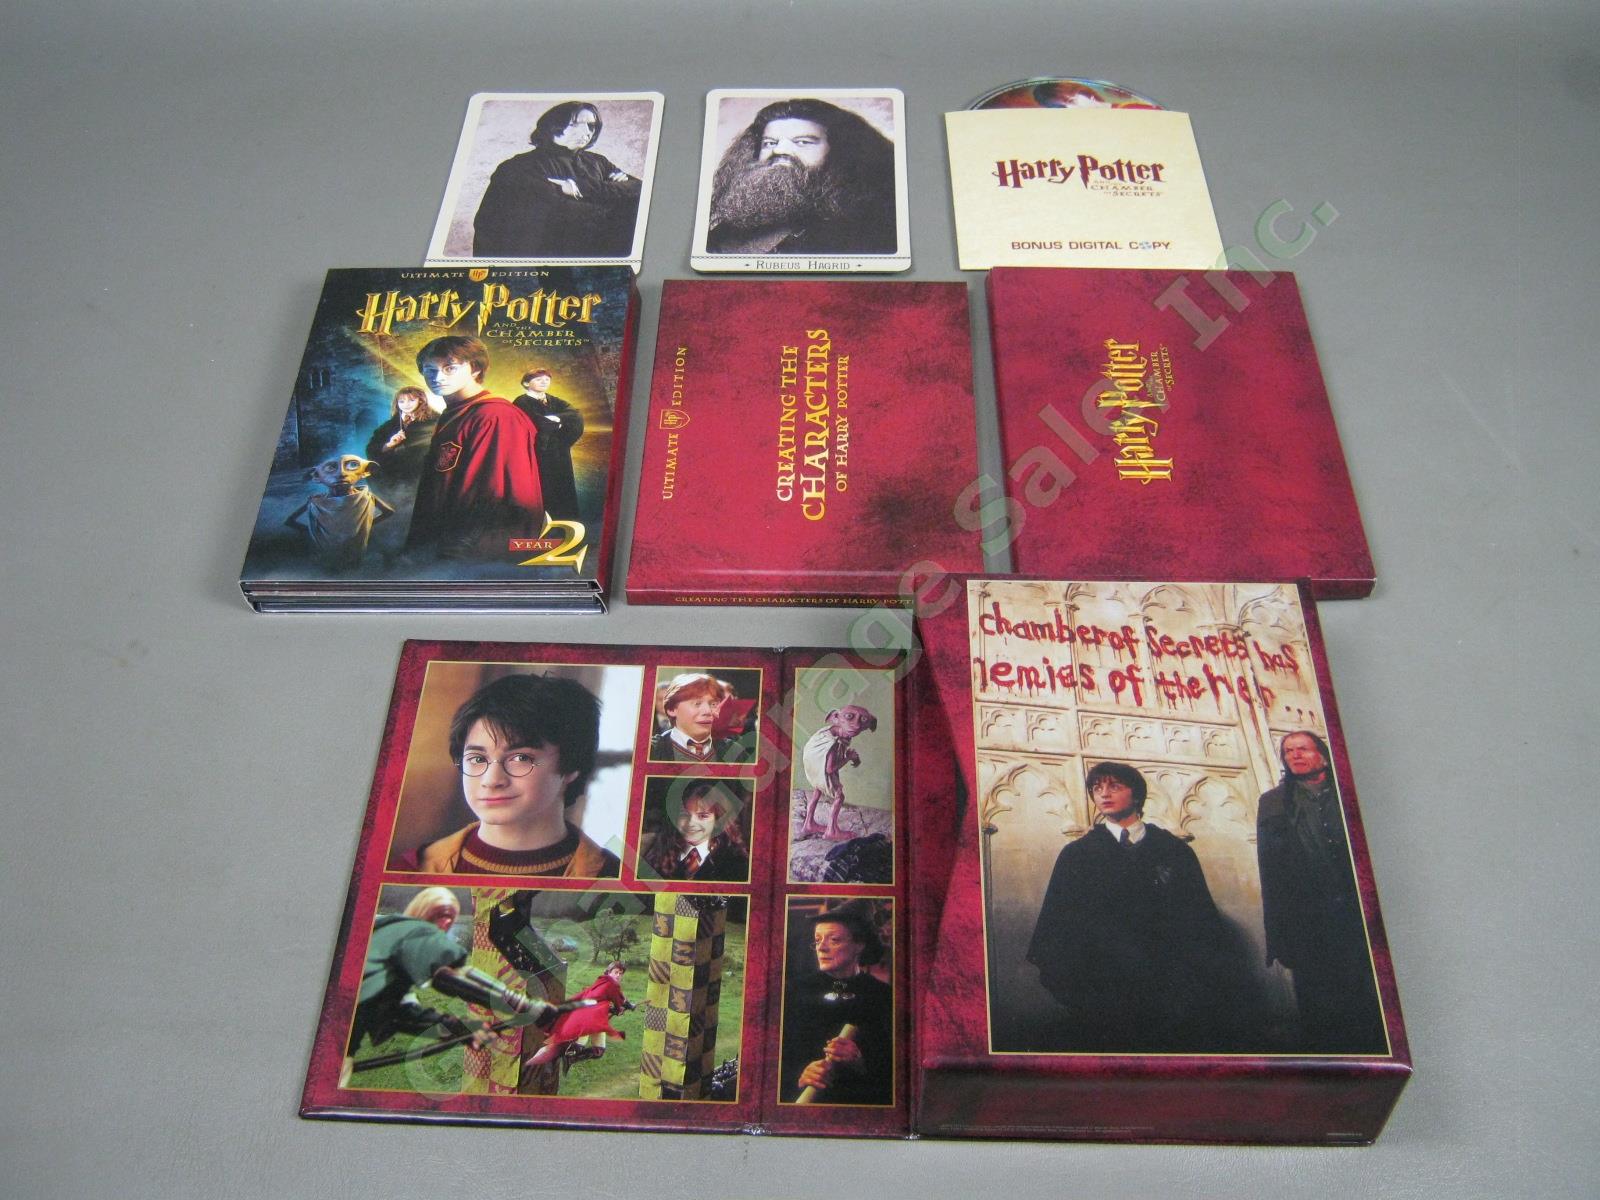 Complete Set Of 7 Harry Potter Ultimate Edition Blu-Ray Movies W/ Boxes Booklets 4